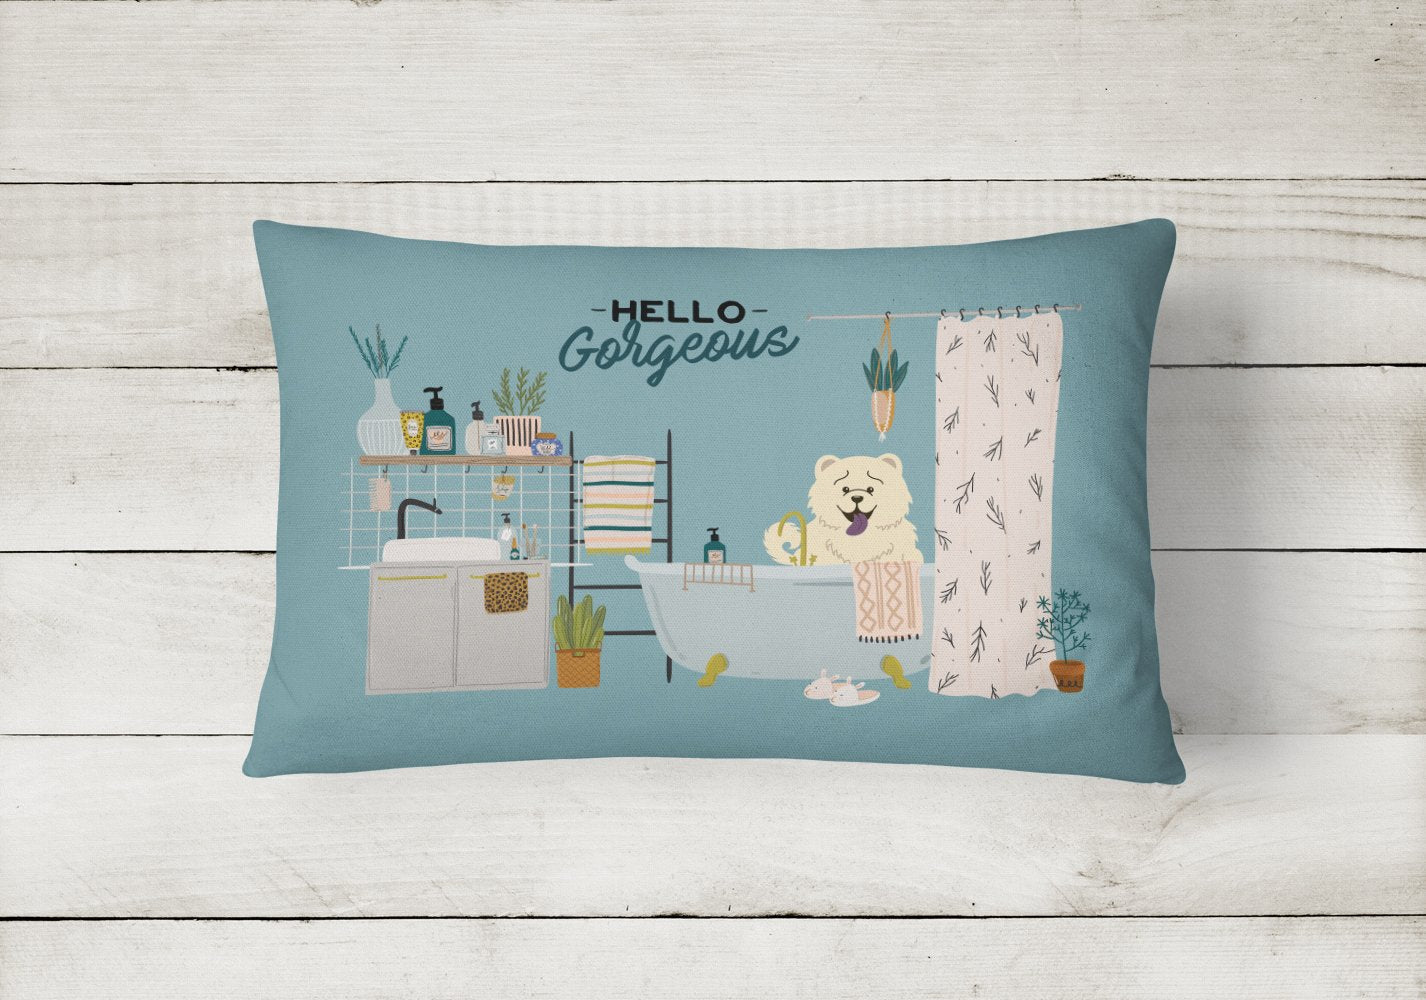 White Chow Chow in Bathtub Canvas Fabric Decorative Pillow CK7562PW1216 by Caroline's Treasures